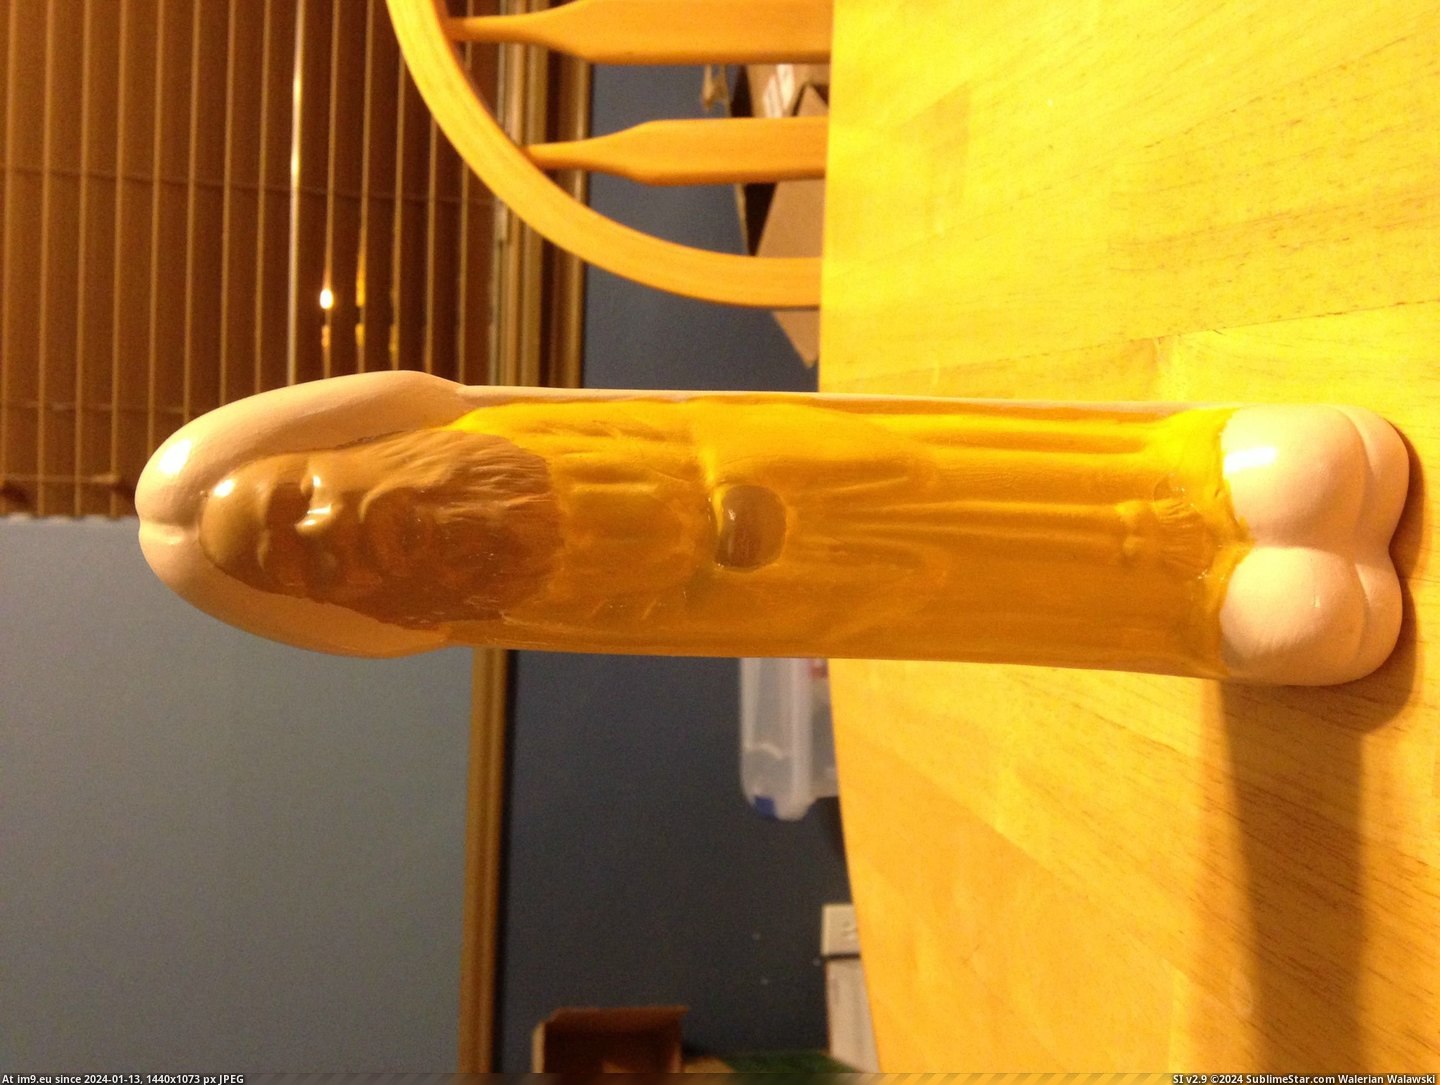 #Wtf #Art #Great #Out #Penis #Gave #Grandmother #Gifts #Got #She #Family #Boyfriend [Wtf] My Great-Grandmother got a boyfriend...so she made this penis art and gave it out as gifts to the family. [NSFW] 4 Pic. (Bild von album My r/WTF favs))